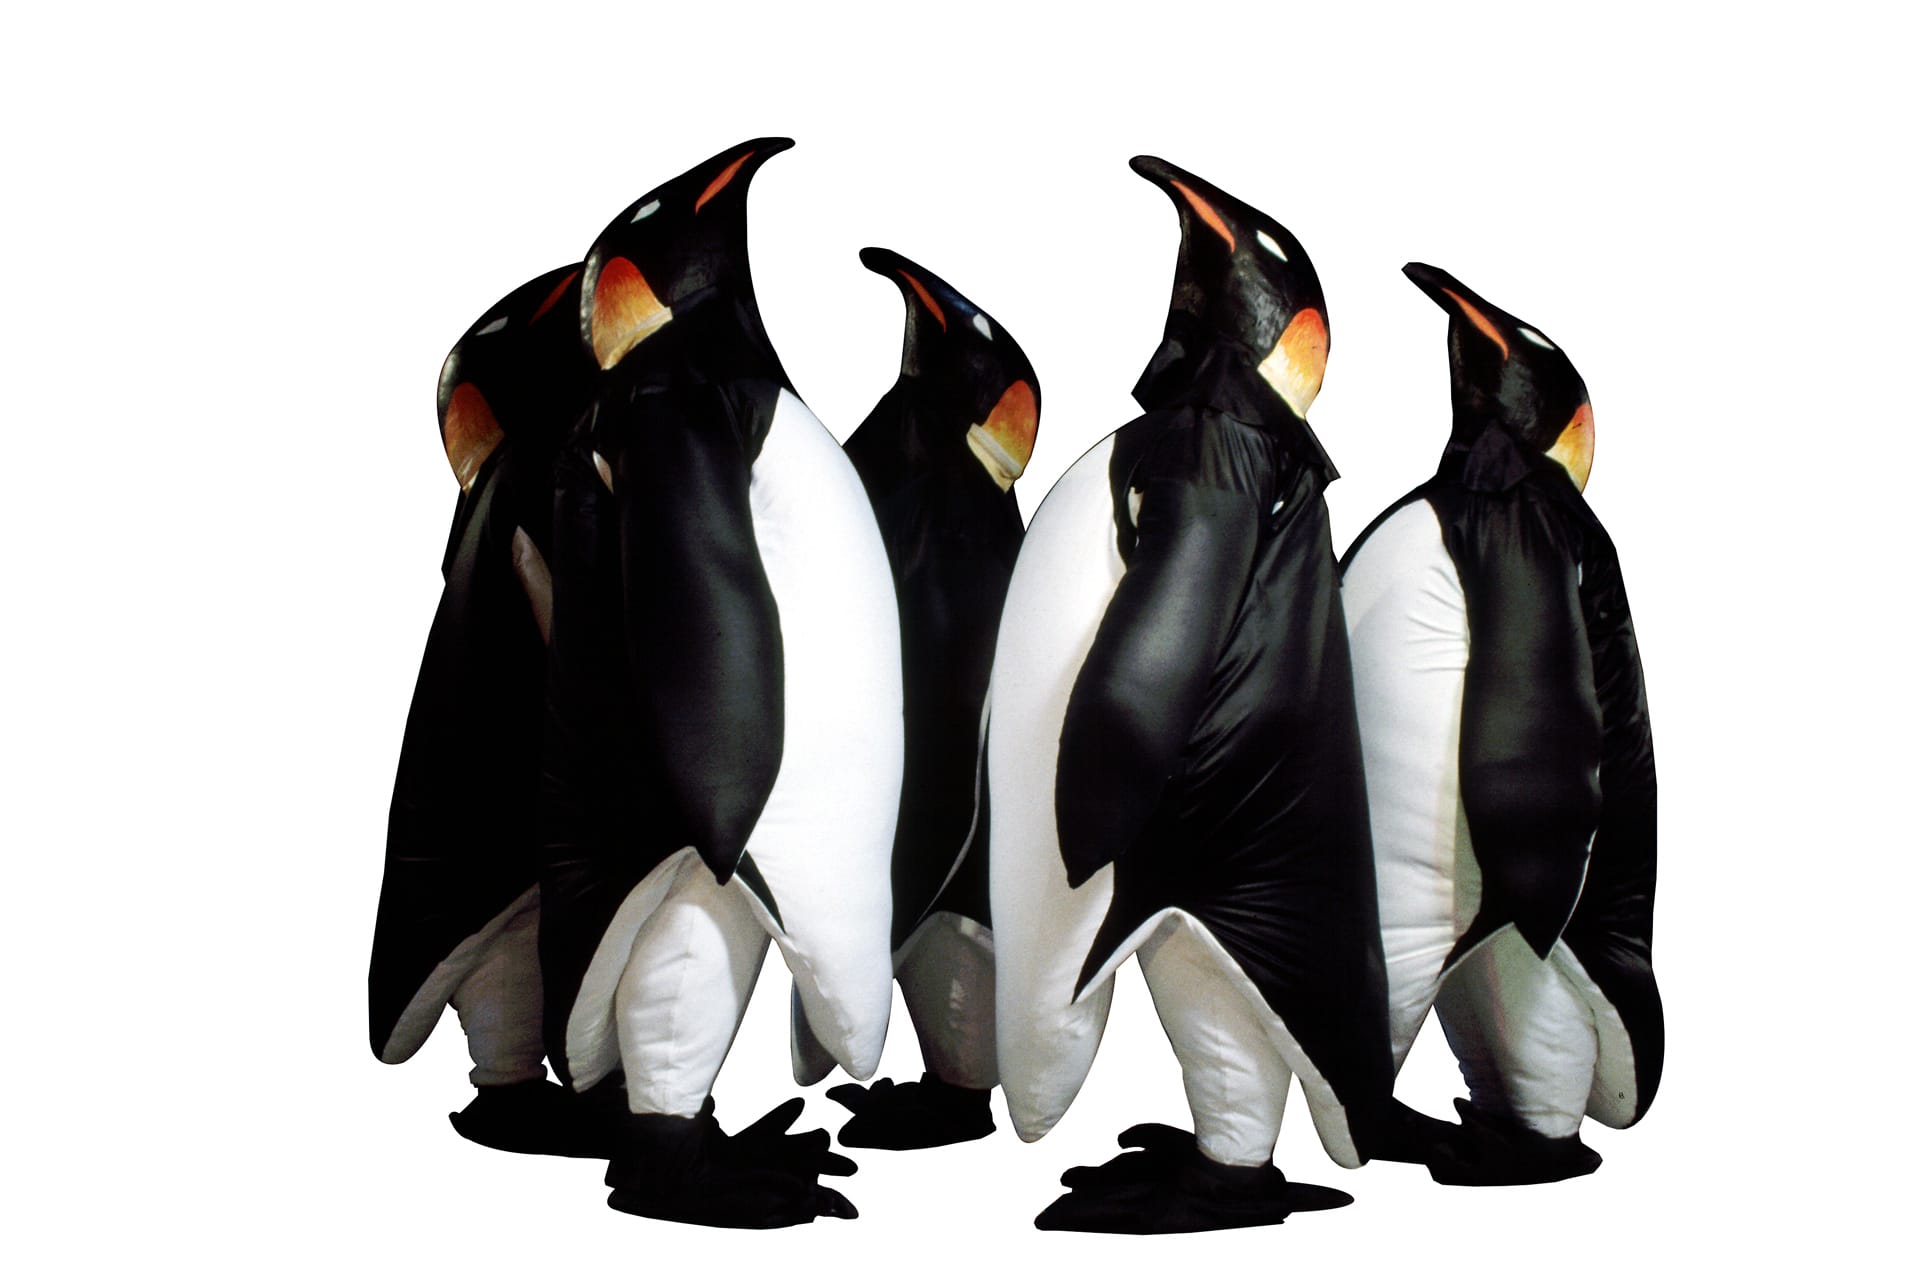 &quot;Frogz&quot; presented by Imago Theatre features  larger-than-life-size penguins, frogs and other creatures through Jan.